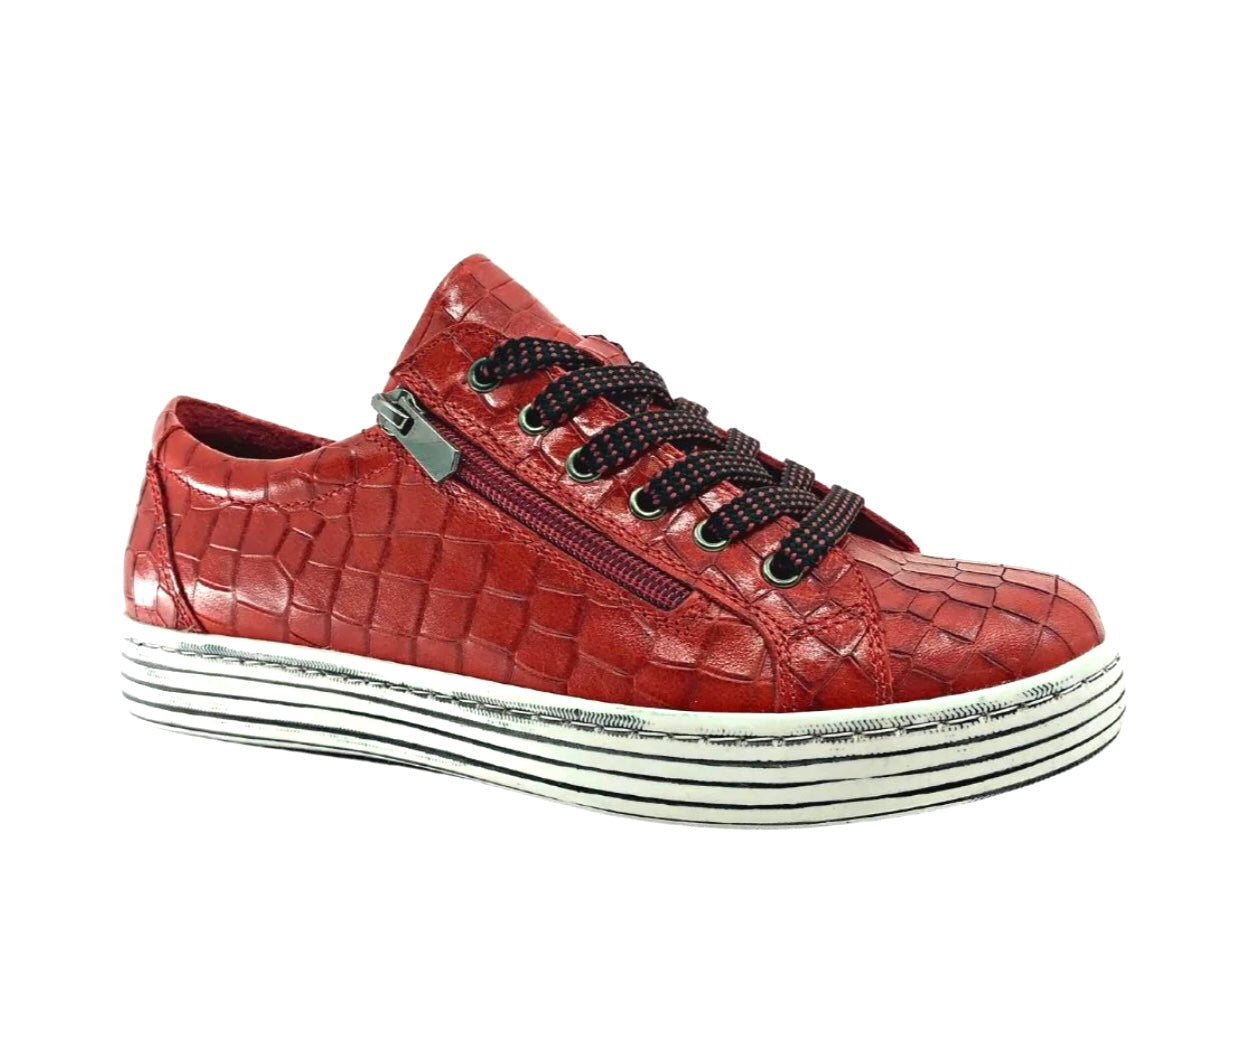 Cabello Comfort Unity Red Croco 6 Eyelet Zip Shoe Made In Turkey